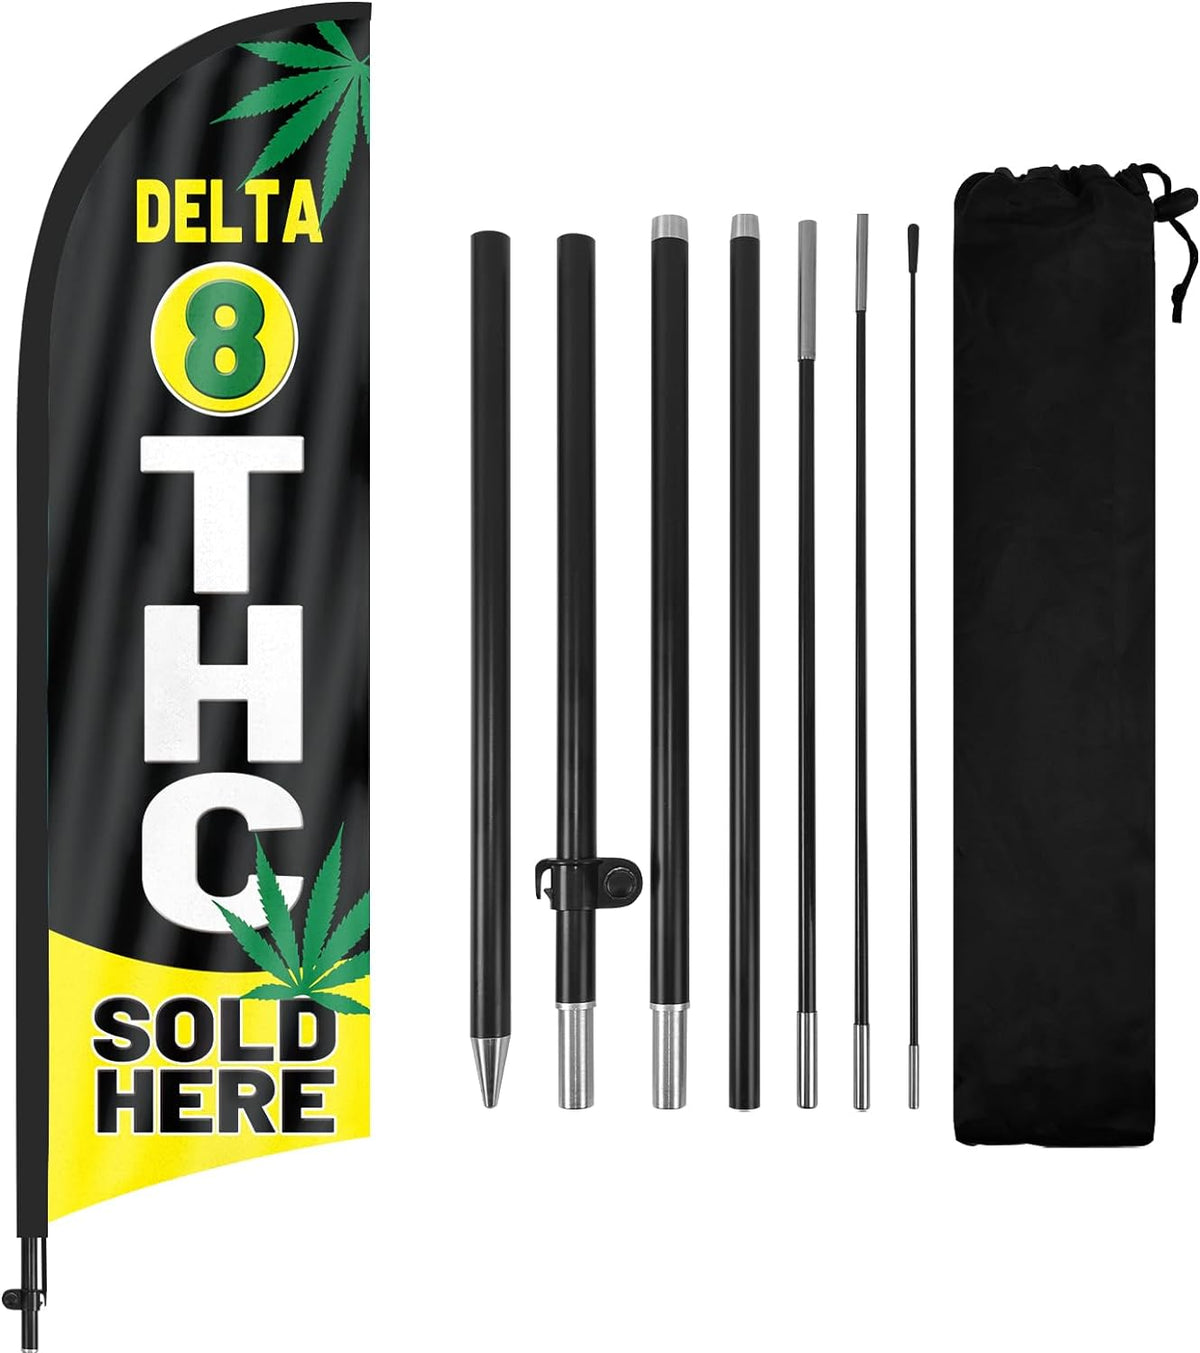 Delta 8 Sold Here Feather Flag: Advertising Banner for Delta 8 Sold Here Business (8ft)